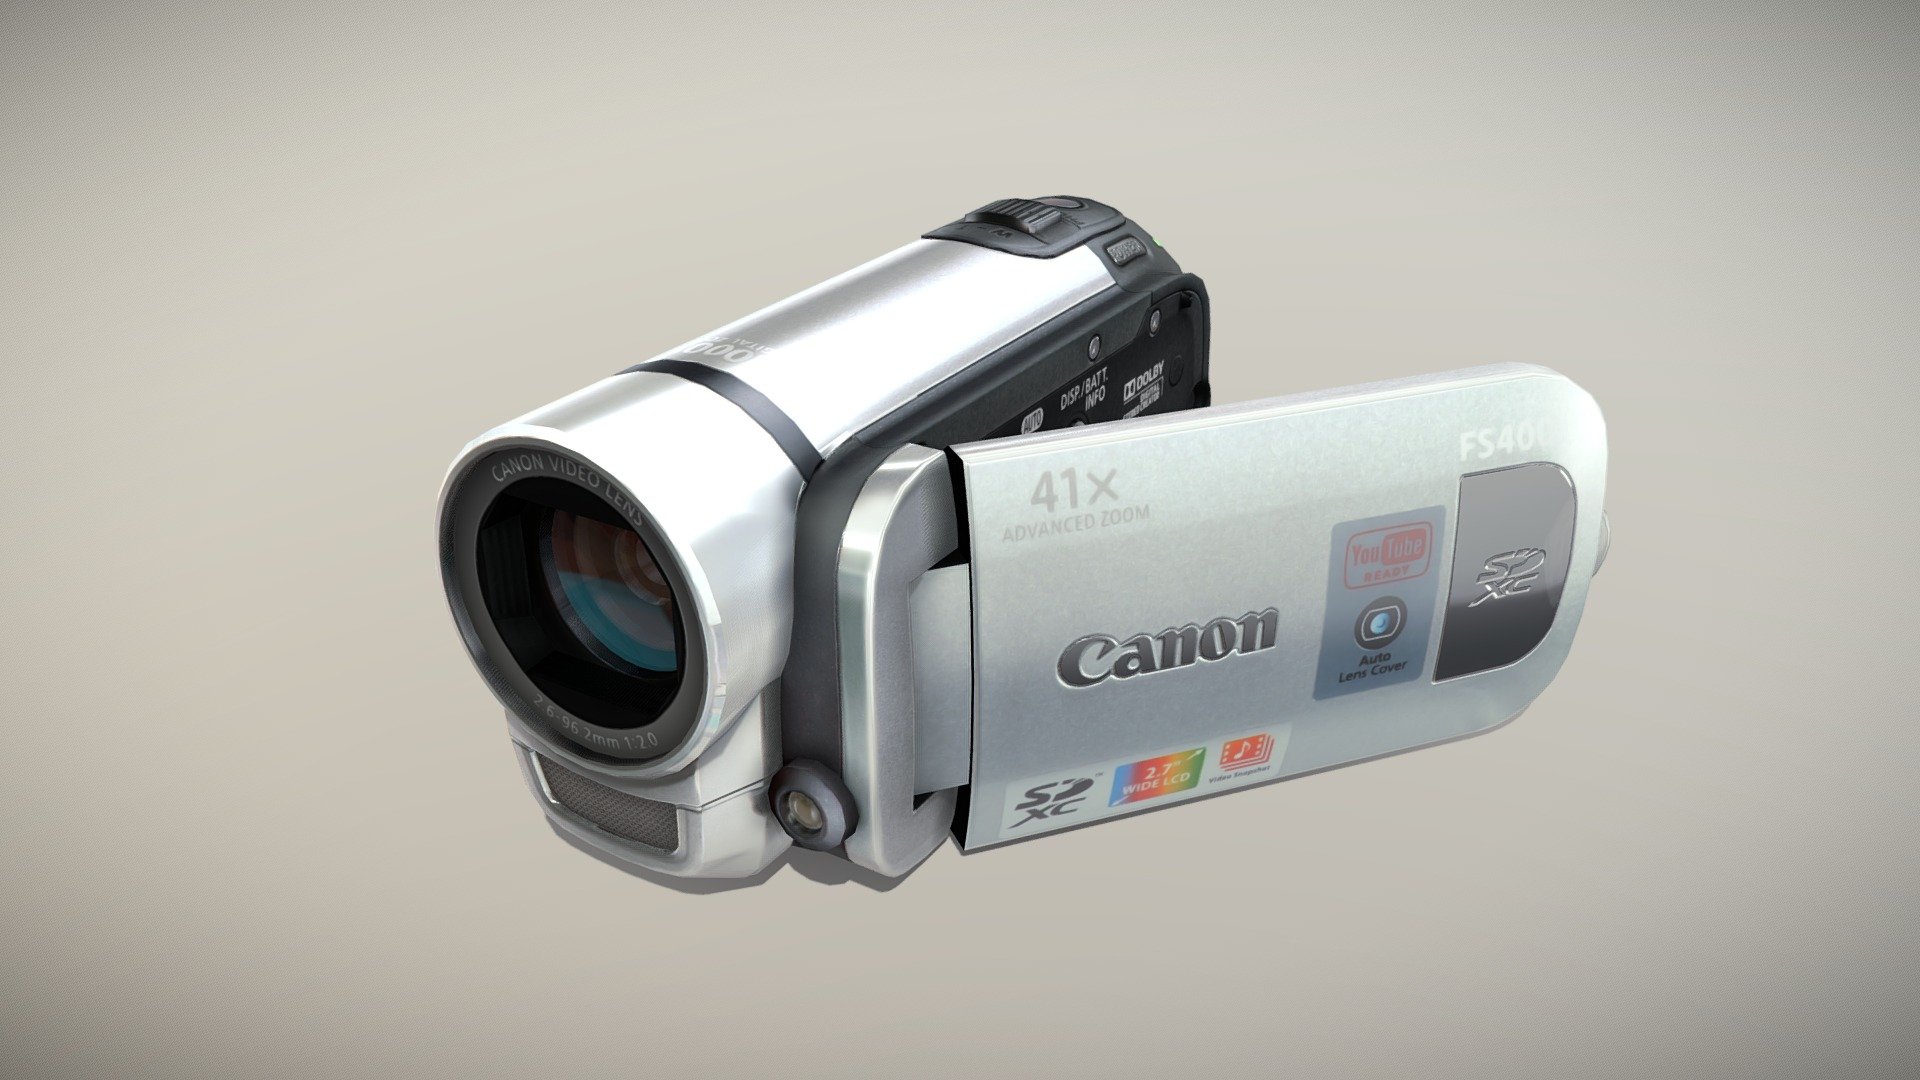 •   Let me present to you high-quality low-poly 3D model Canon FS400 Silver. Modeling was made with ortho-photos of real camcorder that is why all details of design are recreated most authentically.

•    This model consists of a few meshes, it is low-polygonal and it has two materials (Body and Glass Lens).

•   The total of the main textures is 5. Resolution of all textures is 4096 pixels square aspect ratio in .png format. Also there is original texture file .PSD format in separate archive.

•   Polygon count of the model is – 4363.

•   The model has correct dimensions in real-world scale. All parts grouped and named correctly.

•   To use the model in other 3D programs there are scenes saved in formats .fbx, .obj, .DAE, .max (2010 version).

Note: If you see some artifacts on the textures, it means compression works in the Viewer. We recommend setting HD quality for textures. But anyway, original textures have no artifacts 3d model